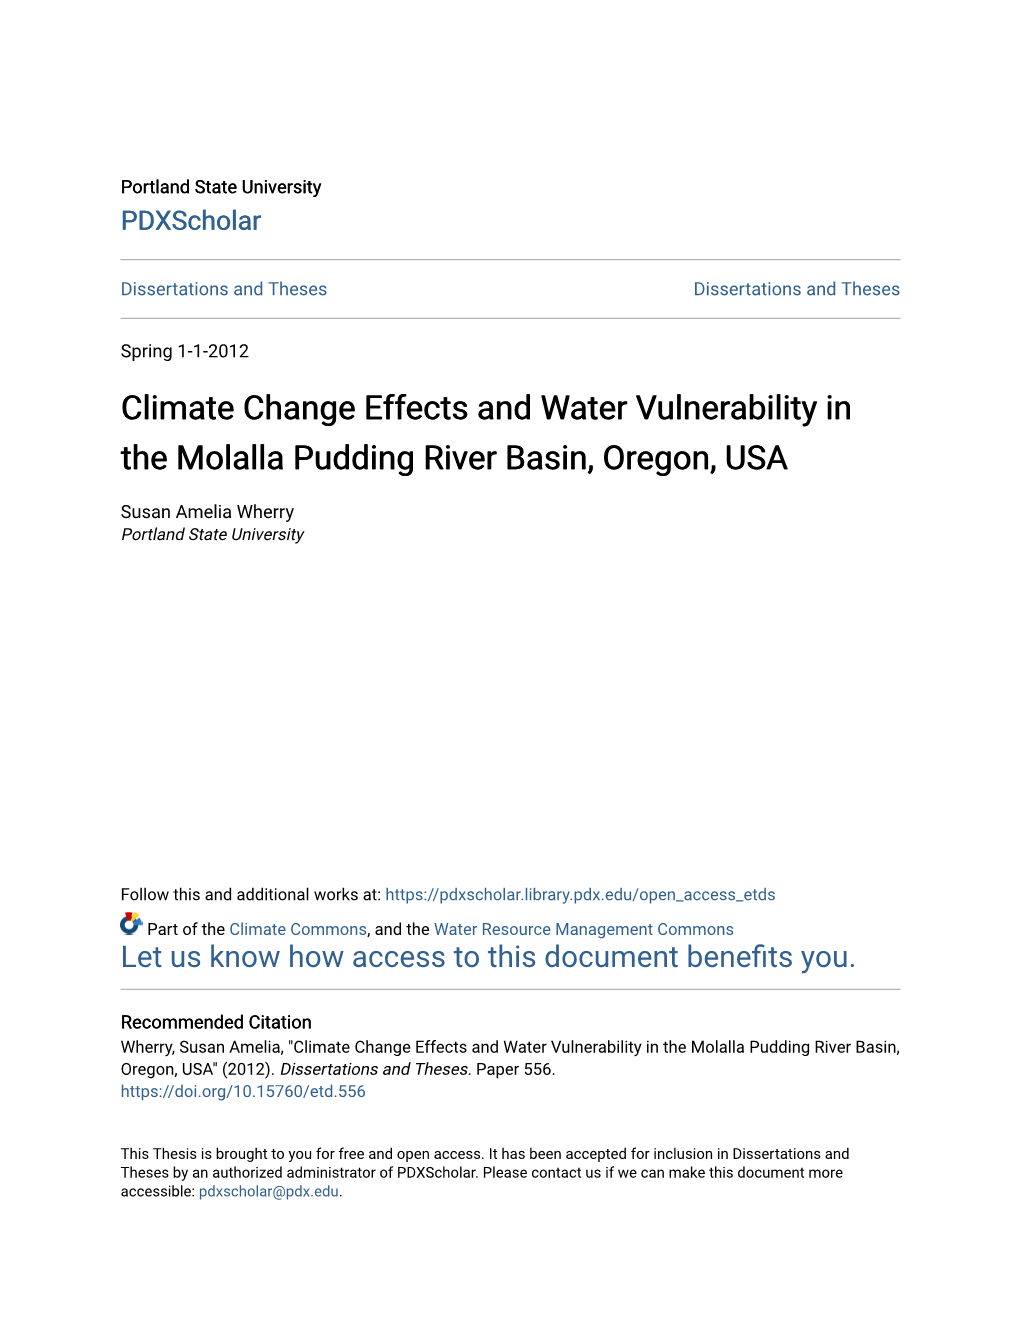 Climate Change Effects and Water Vulnerability in the Molalla Pudding River Basin, Oregon, USA